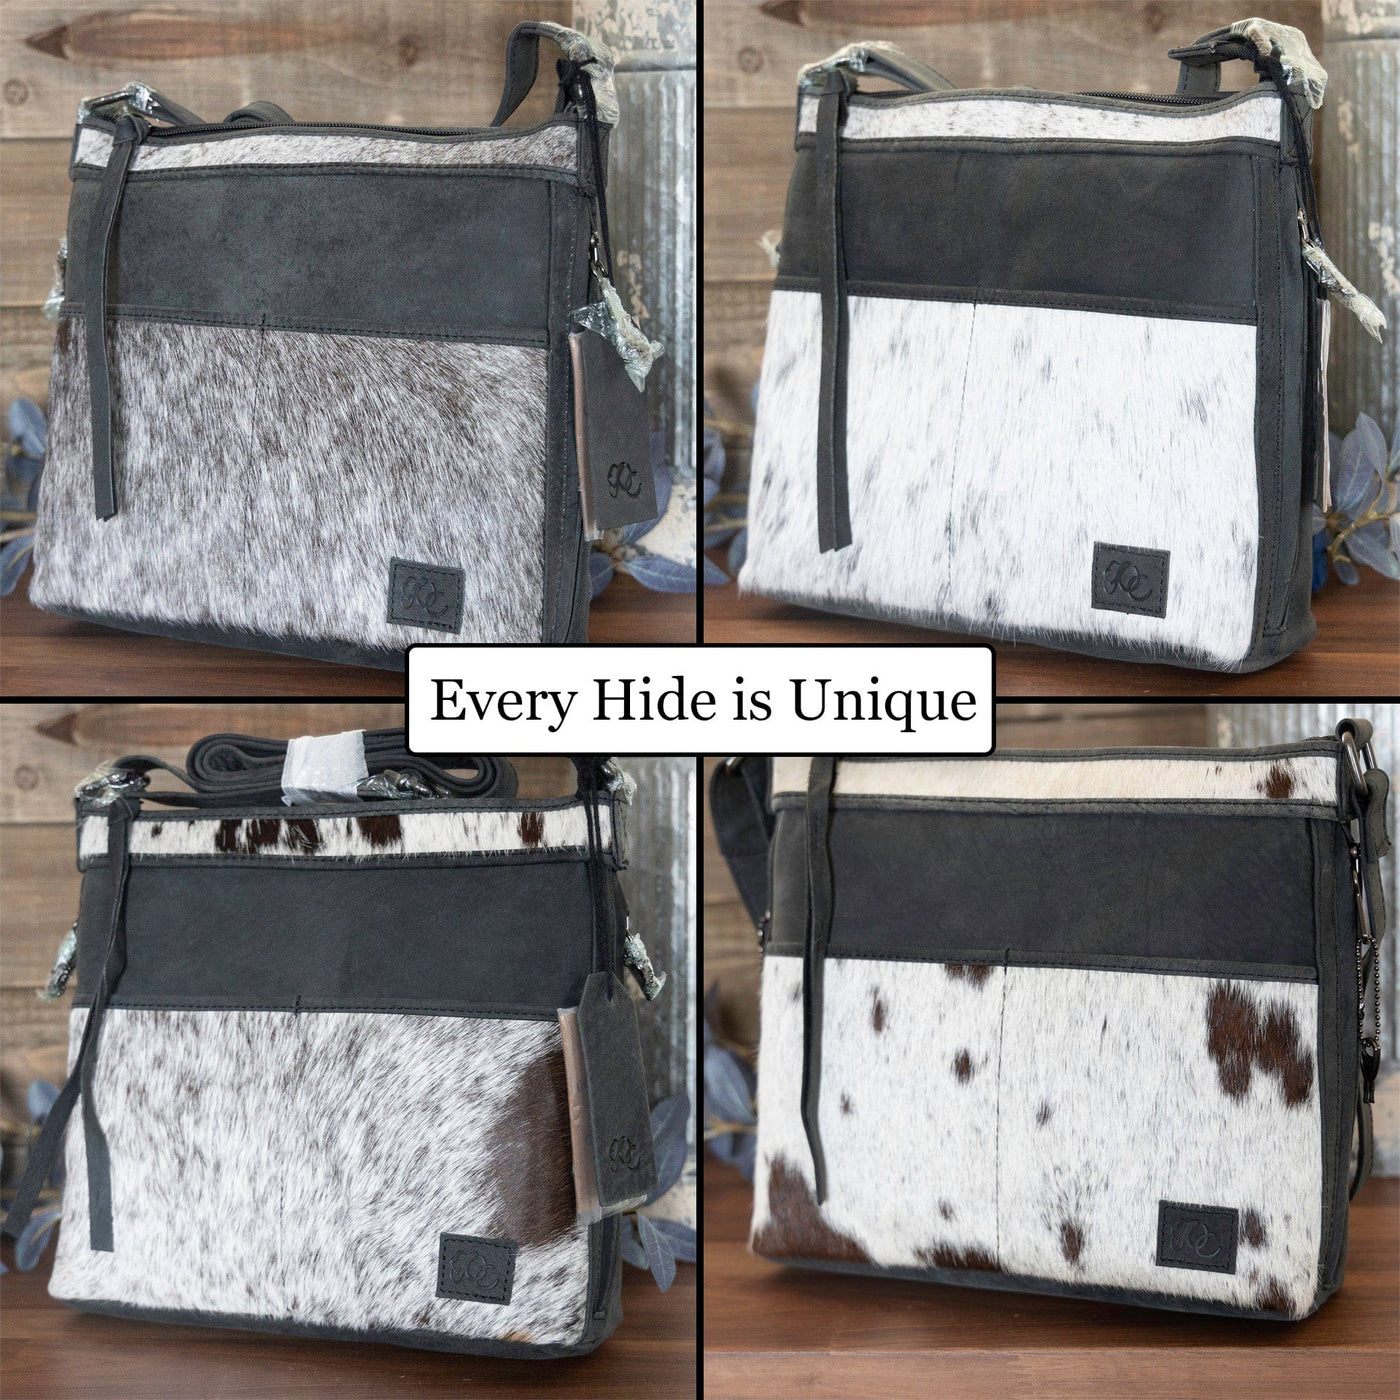 Concealed Carry Diana Crossbody by UC Leather Company -  soft leather shoulder bags for women's -  crossbody bags for everyday use -  most popular crossbody bag -  crossbody bags for guns -  crossbody handgun bag -  Unique Hide Purse -  Conceal Carry Western Purse -  Stylish CCW Bag -  Bag for Conceal Carrying Women - Gun Bag for Women